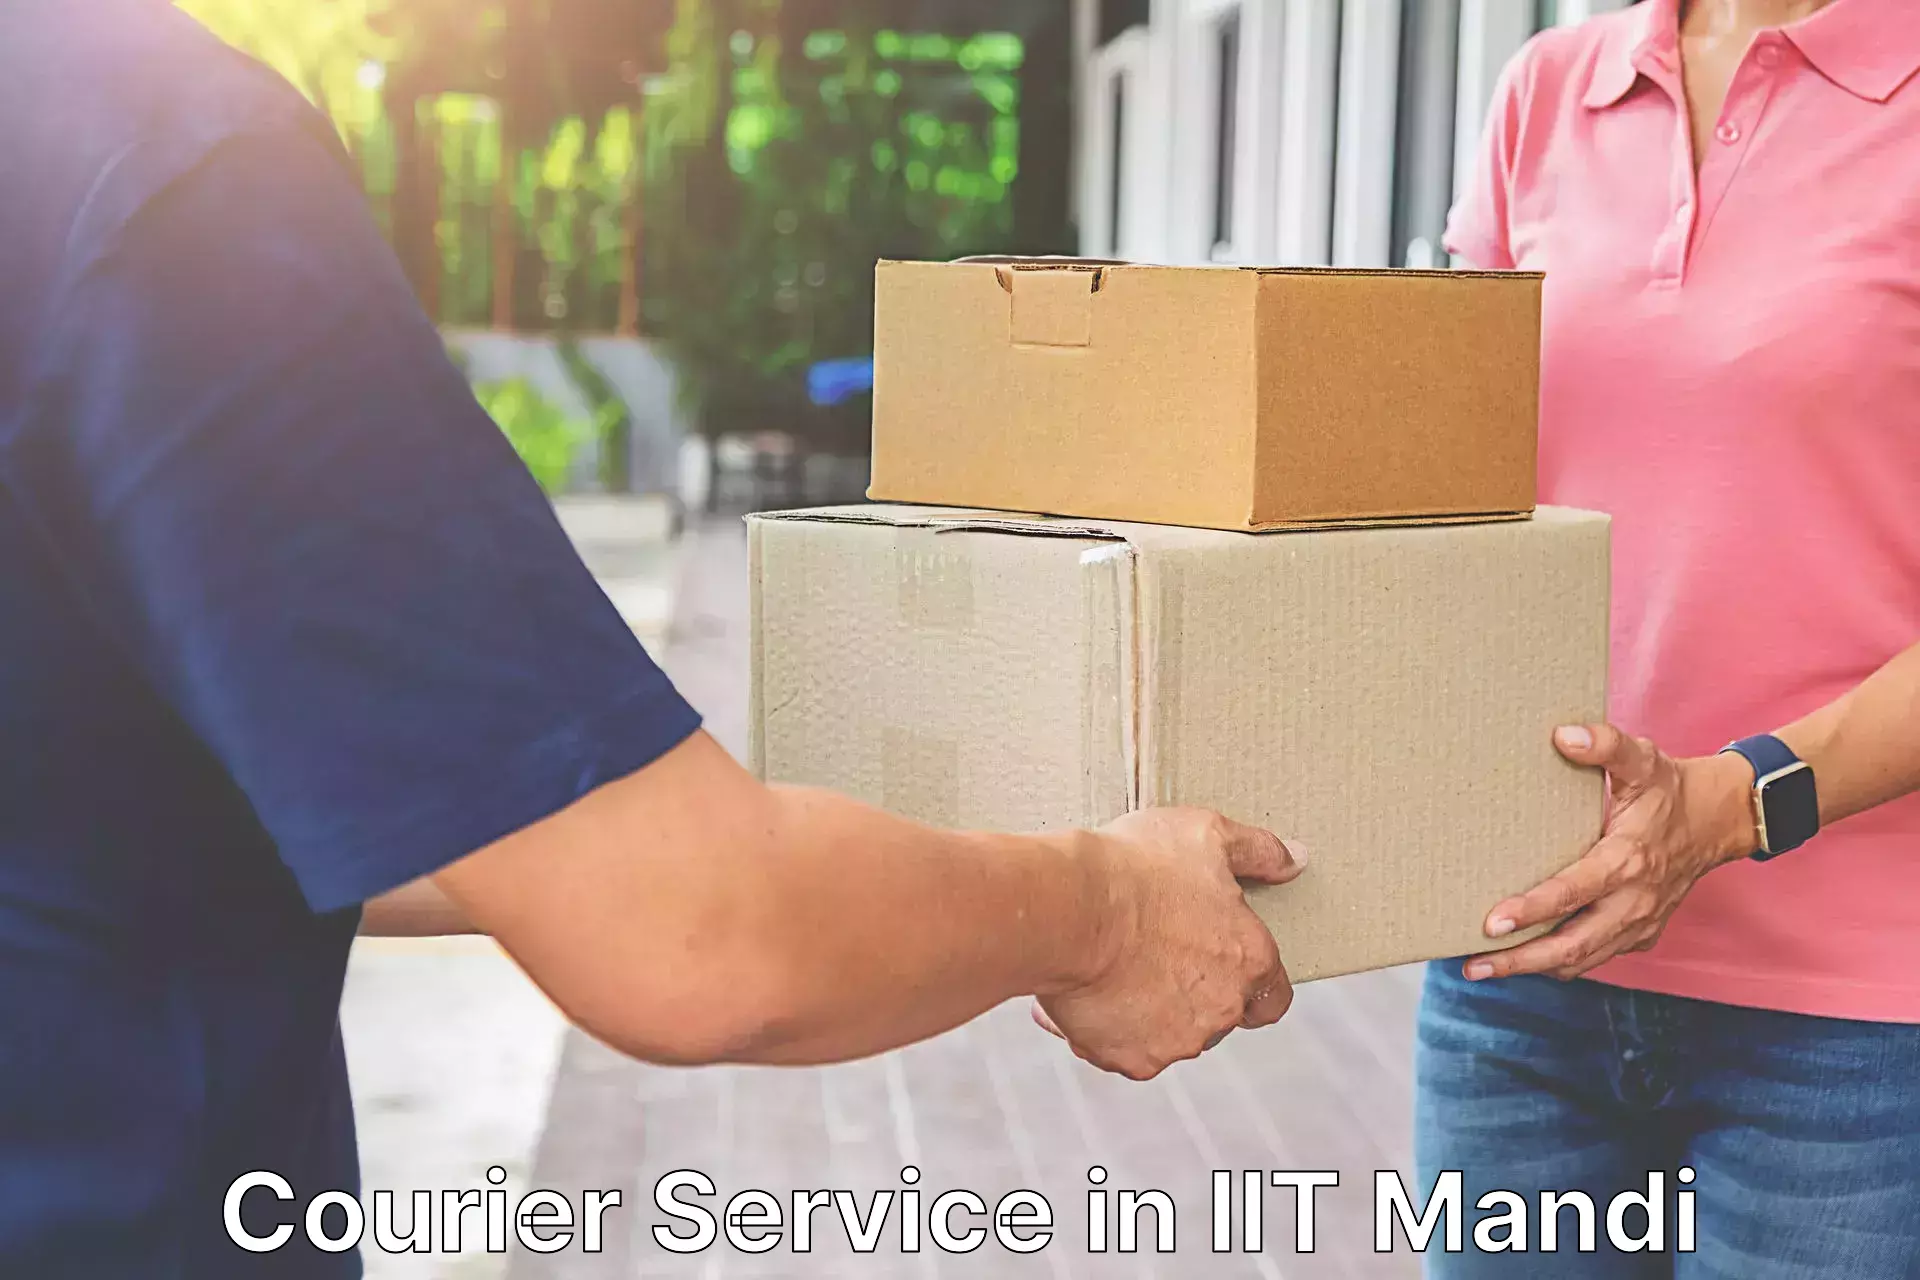 Tailored freight services in IIT Mandi